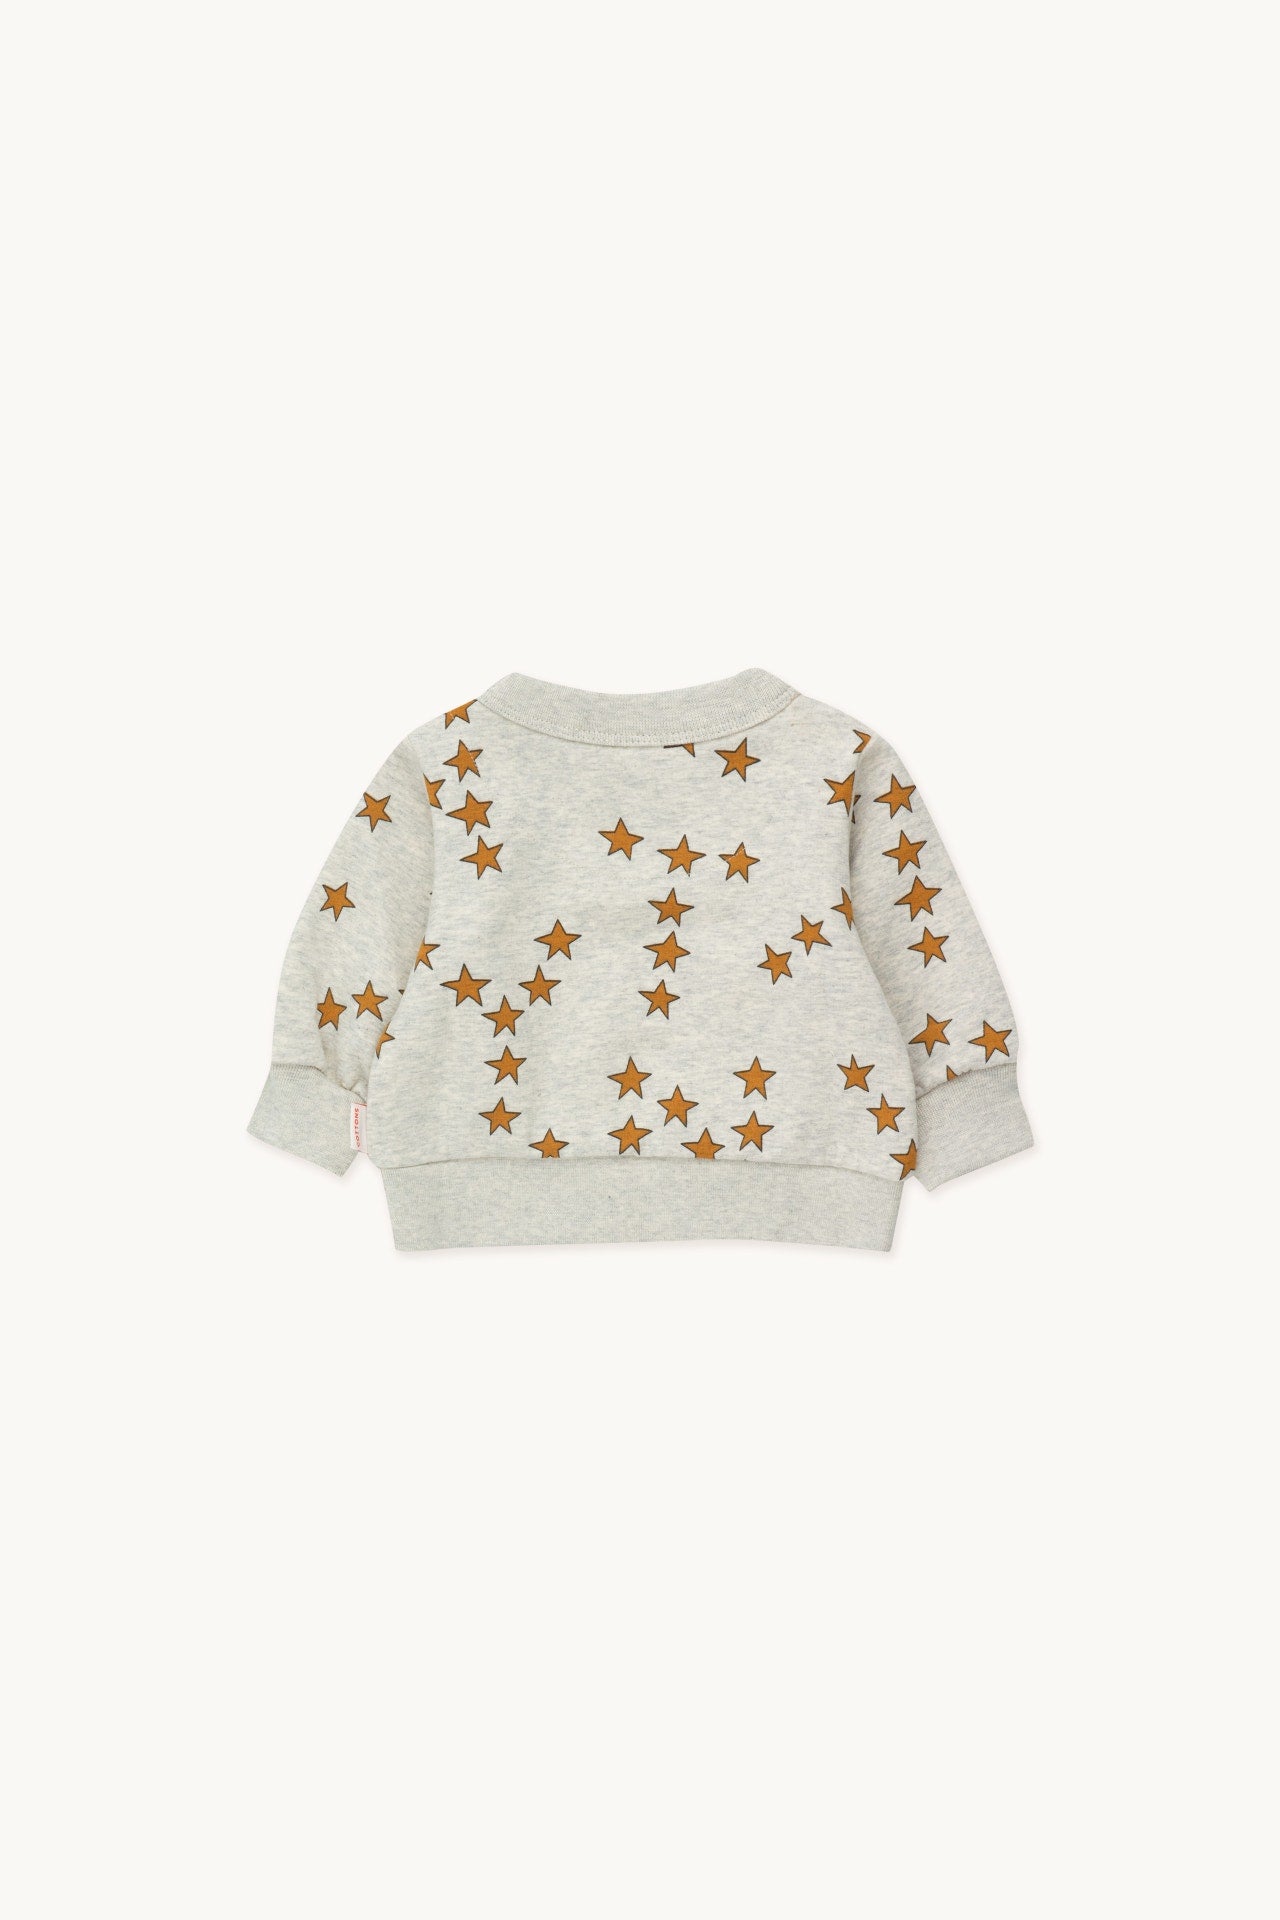 Yellow and grey Tiny Cottons star sweatshirt for babies